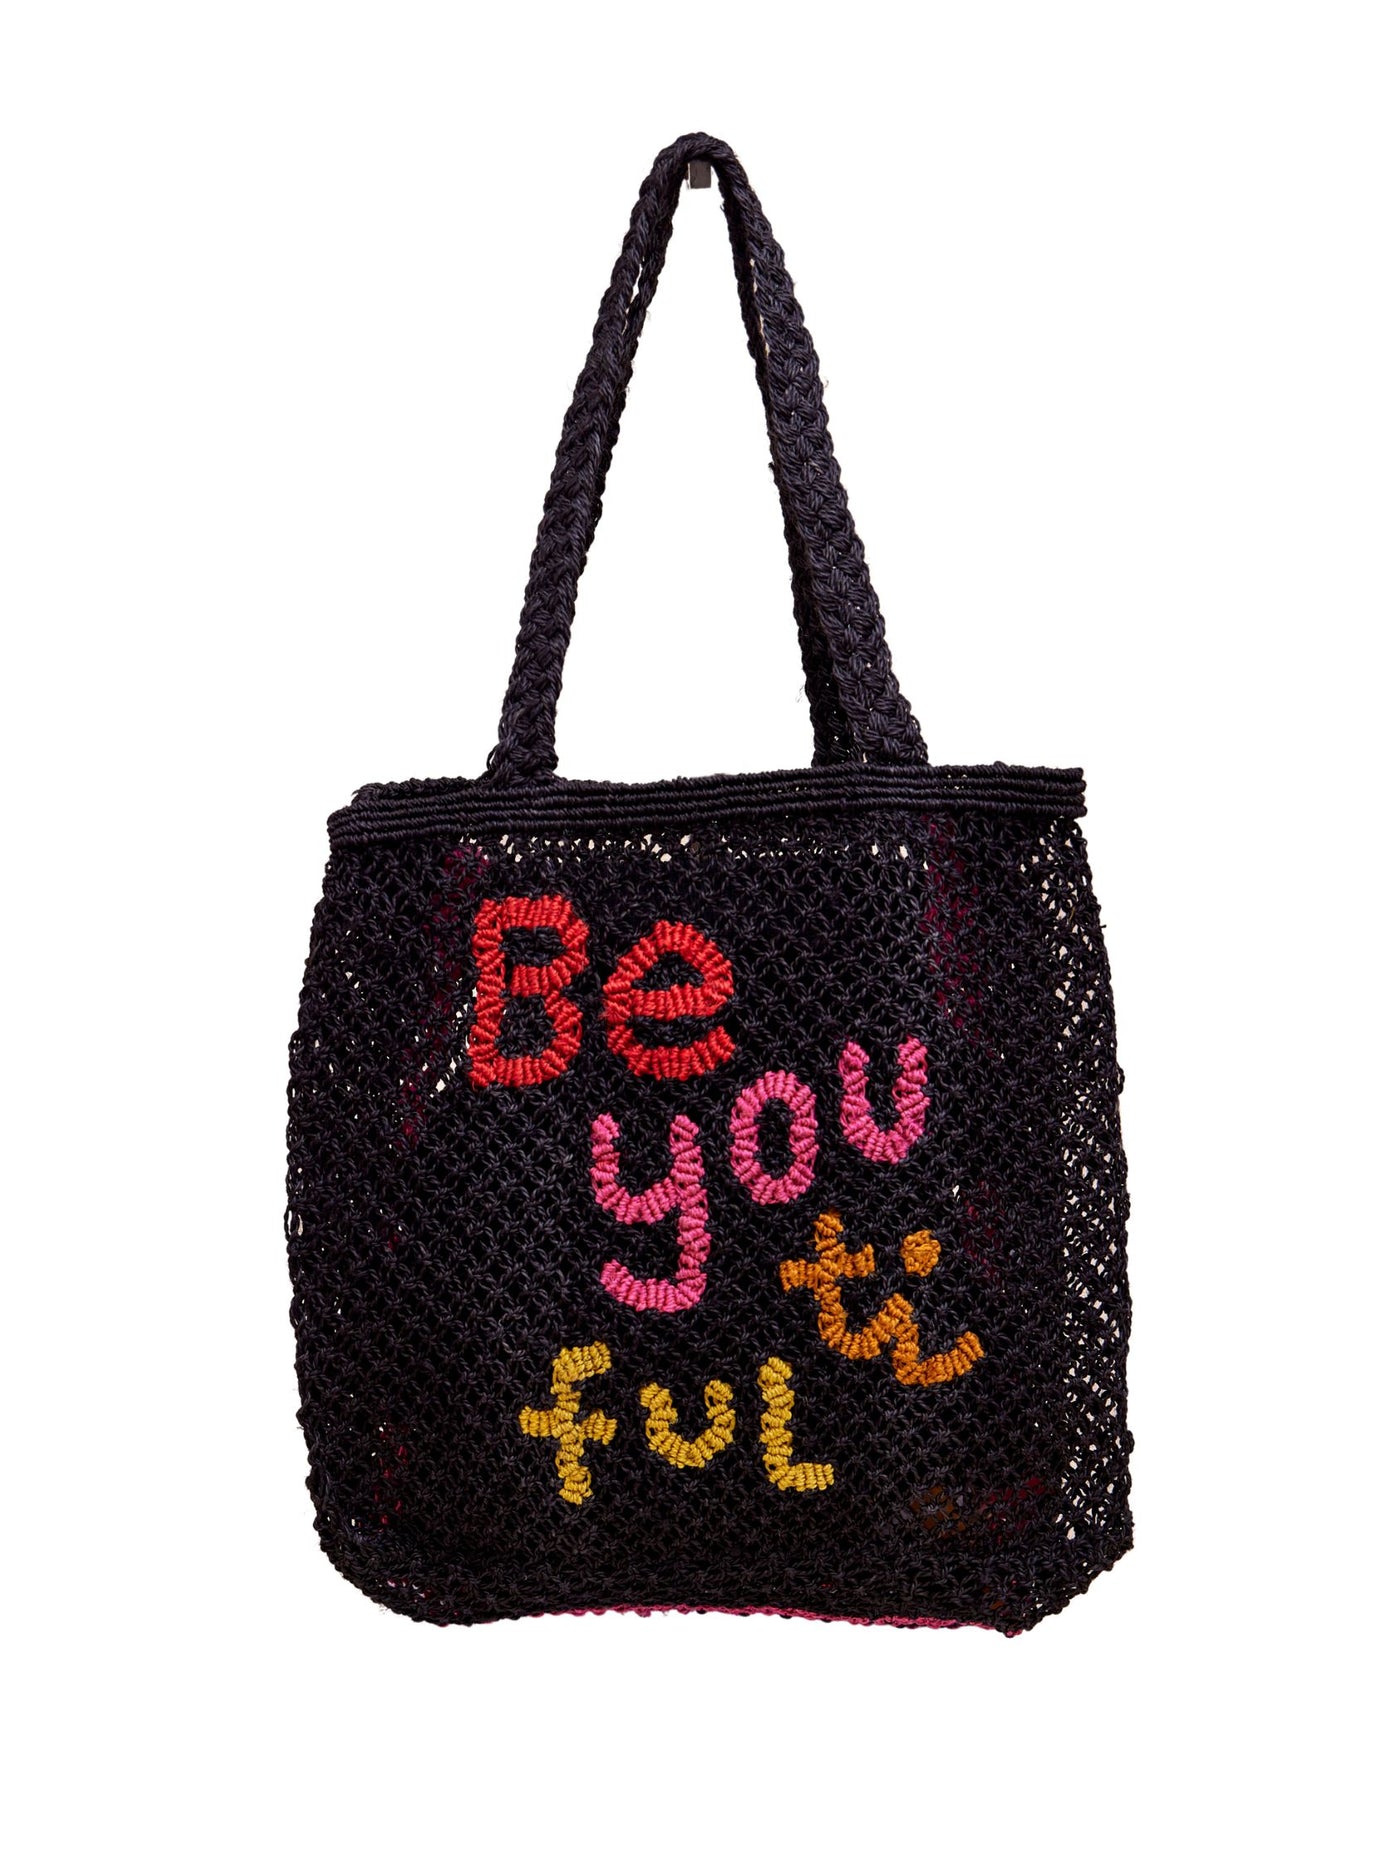 Be You Ti Ful - Black and multi pink